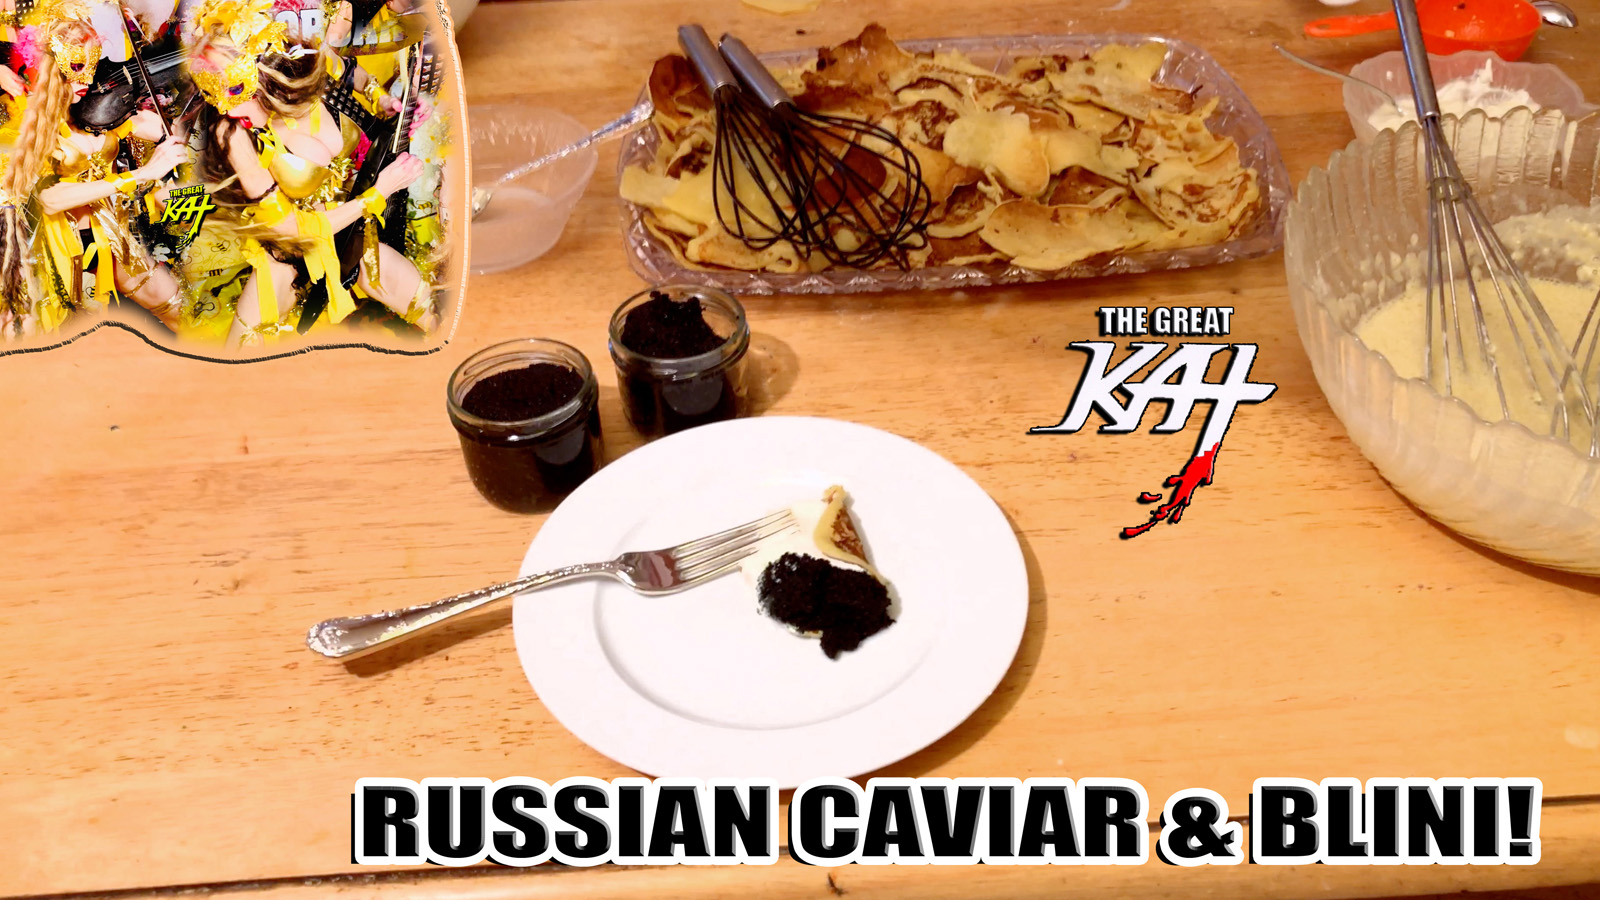 RUSSIAN CAVIAR & BLINI! From "CHEF GREAT KAT COOKS RUSSIAN CAVIAR AND BLINI WITH RIMSKY-KORSAKOV" VIDEO!!